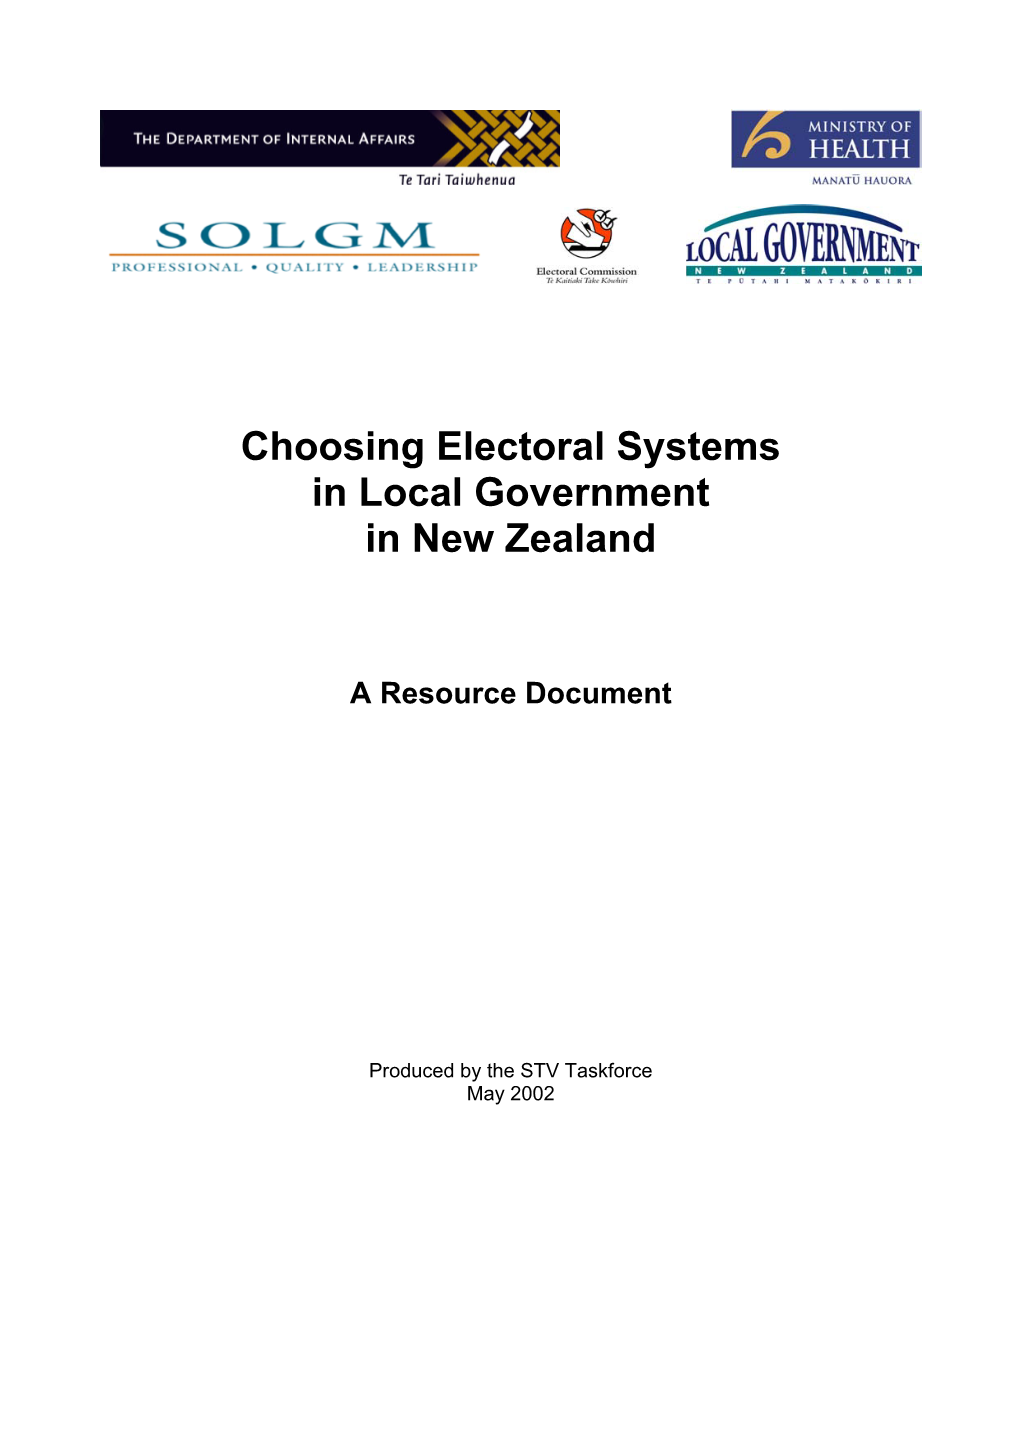 Choosing Electoral Systems in Local Government in New Zealand